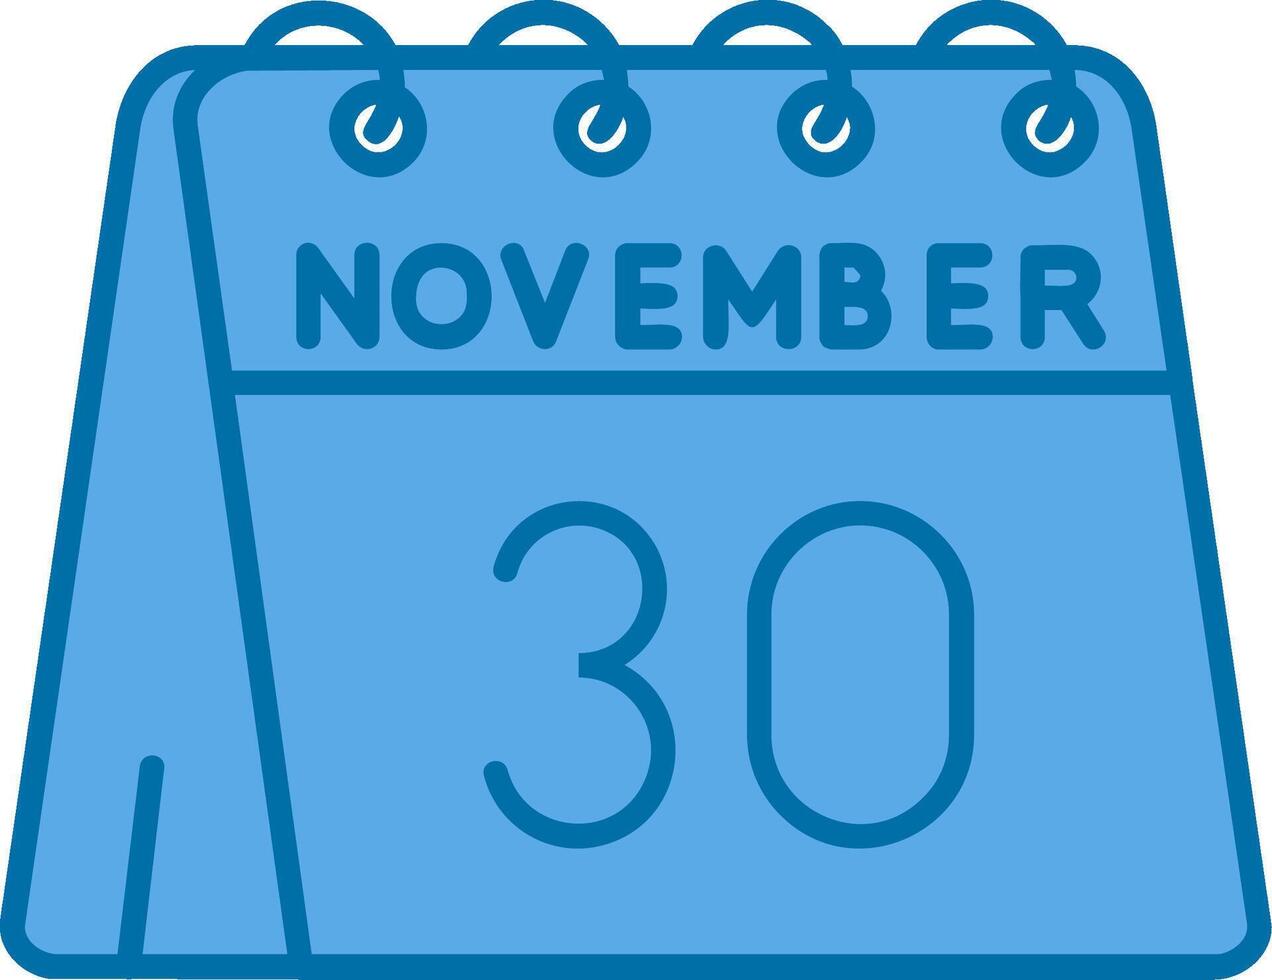 30th of November Blue Line Filled Icon vector